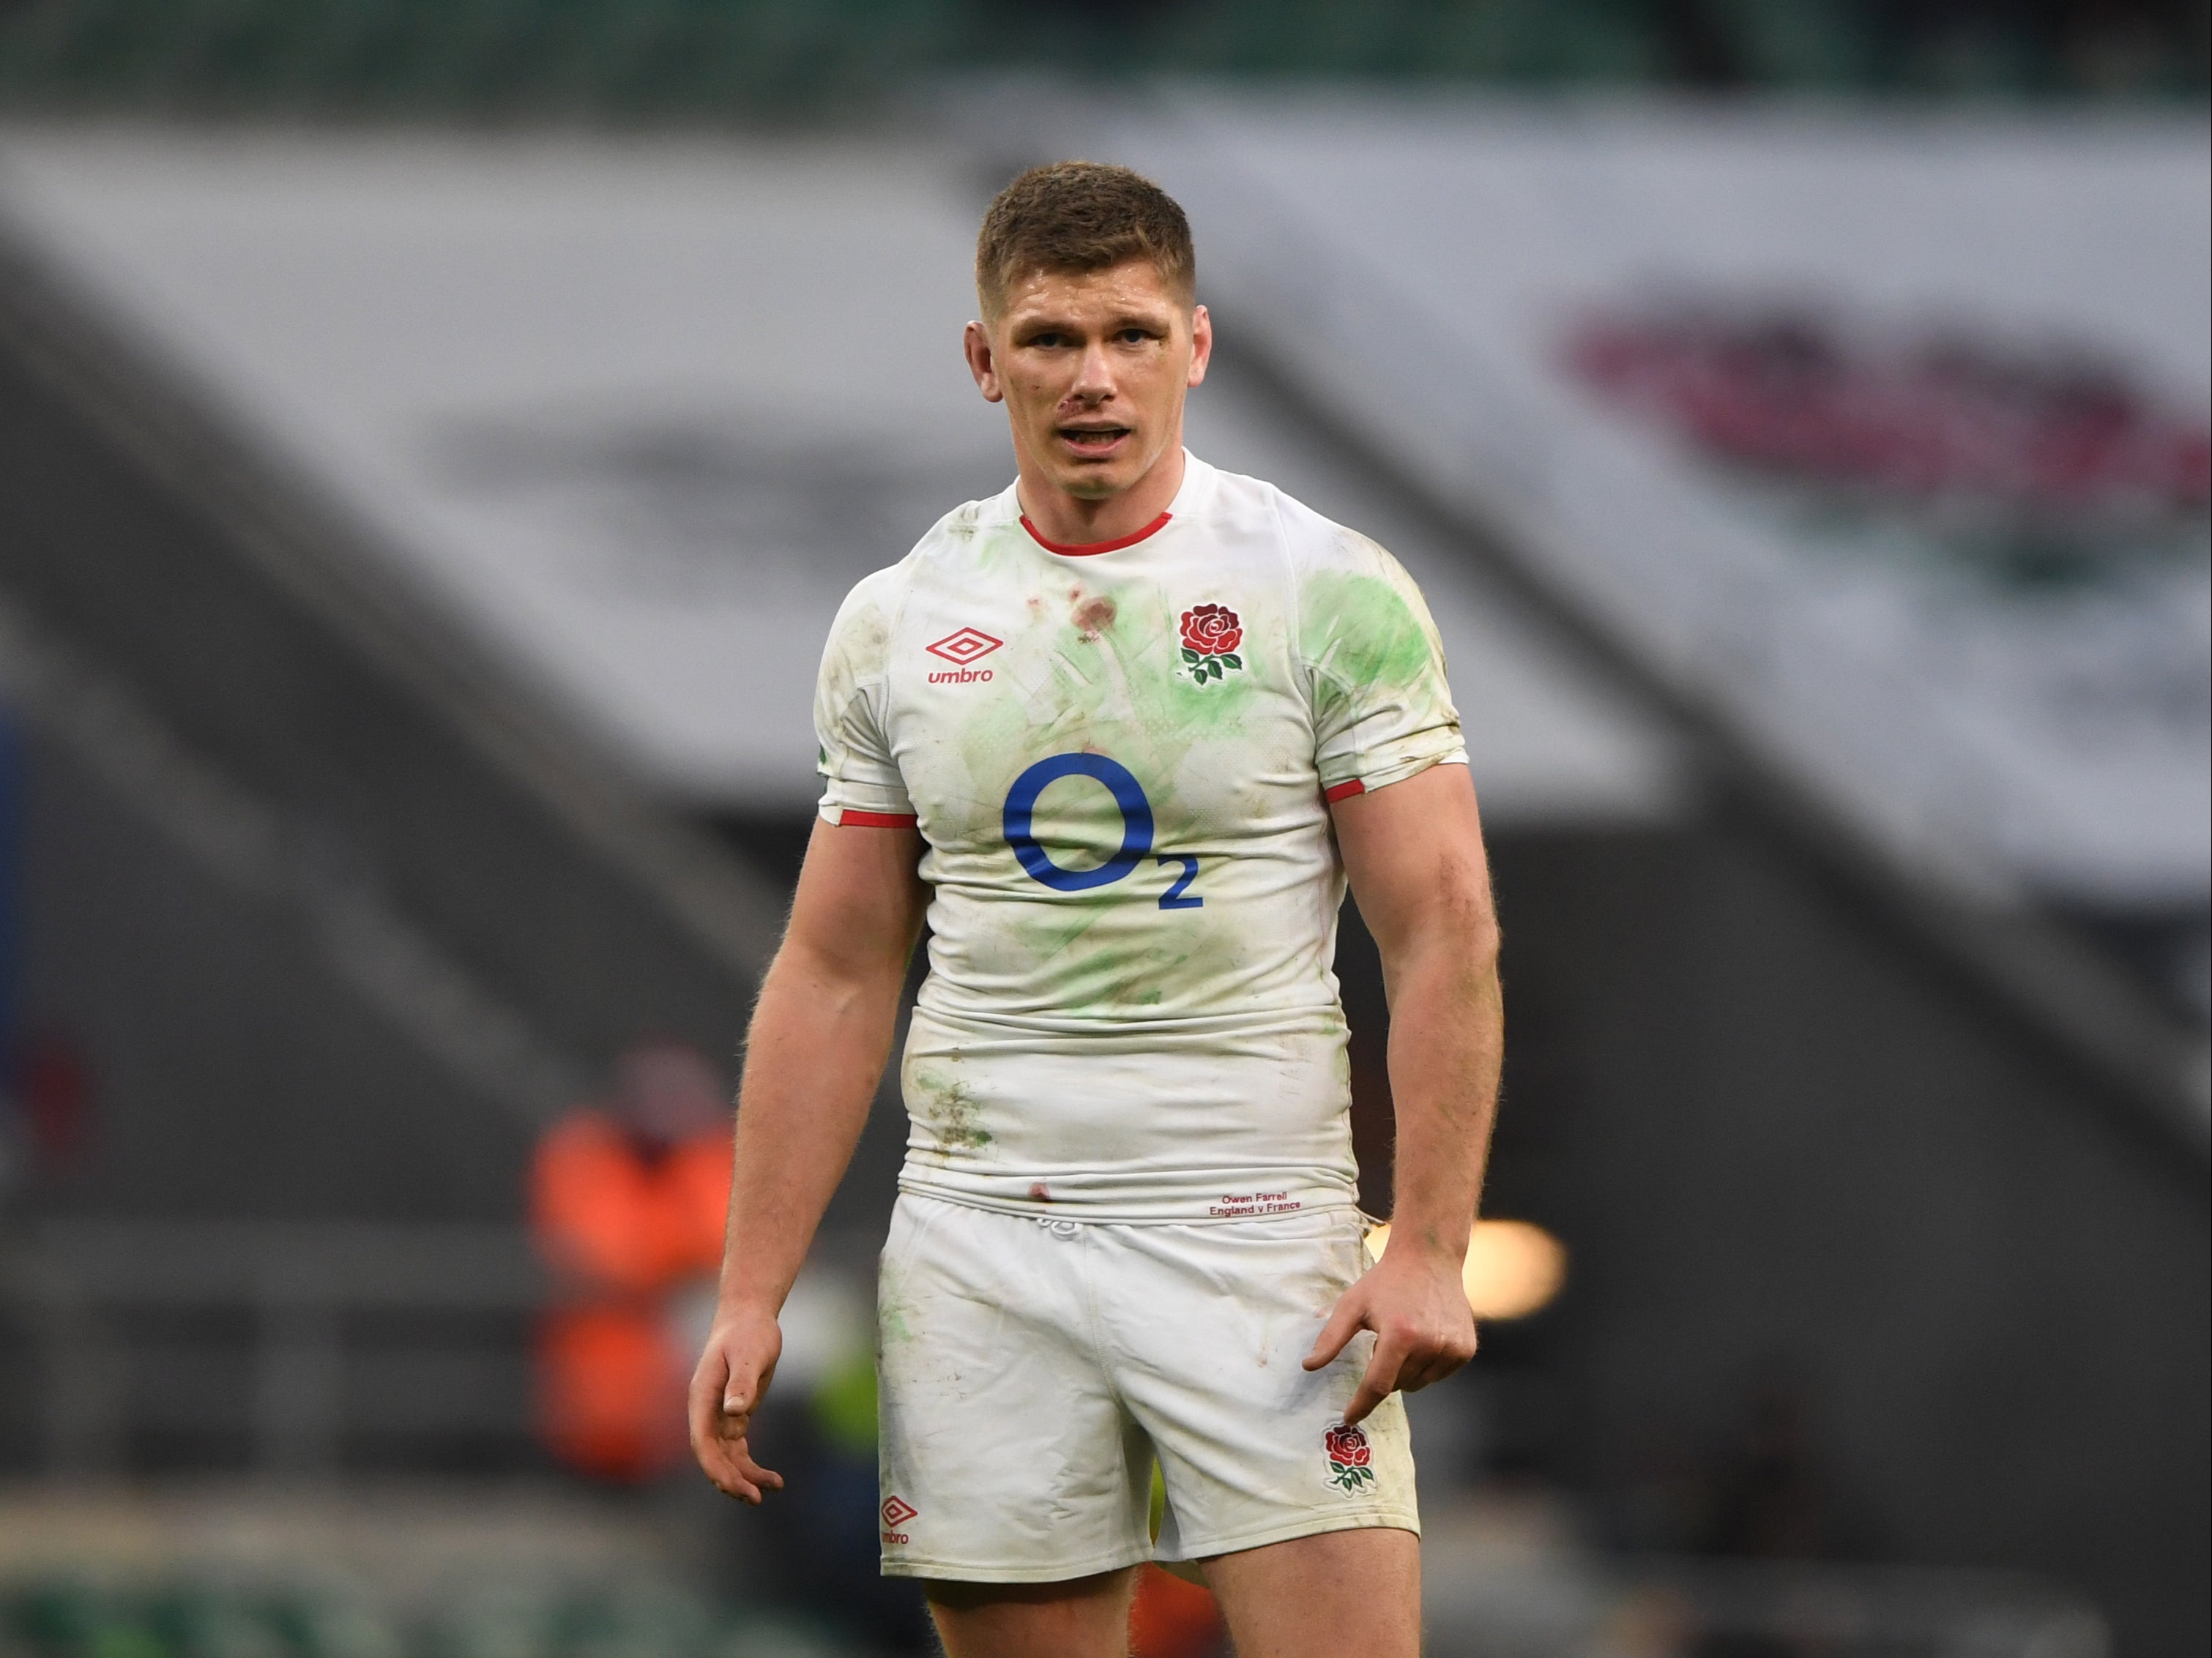 Owen Farrell left it late to kick the winning points as England defeated France to win the Autumn Nations Cup